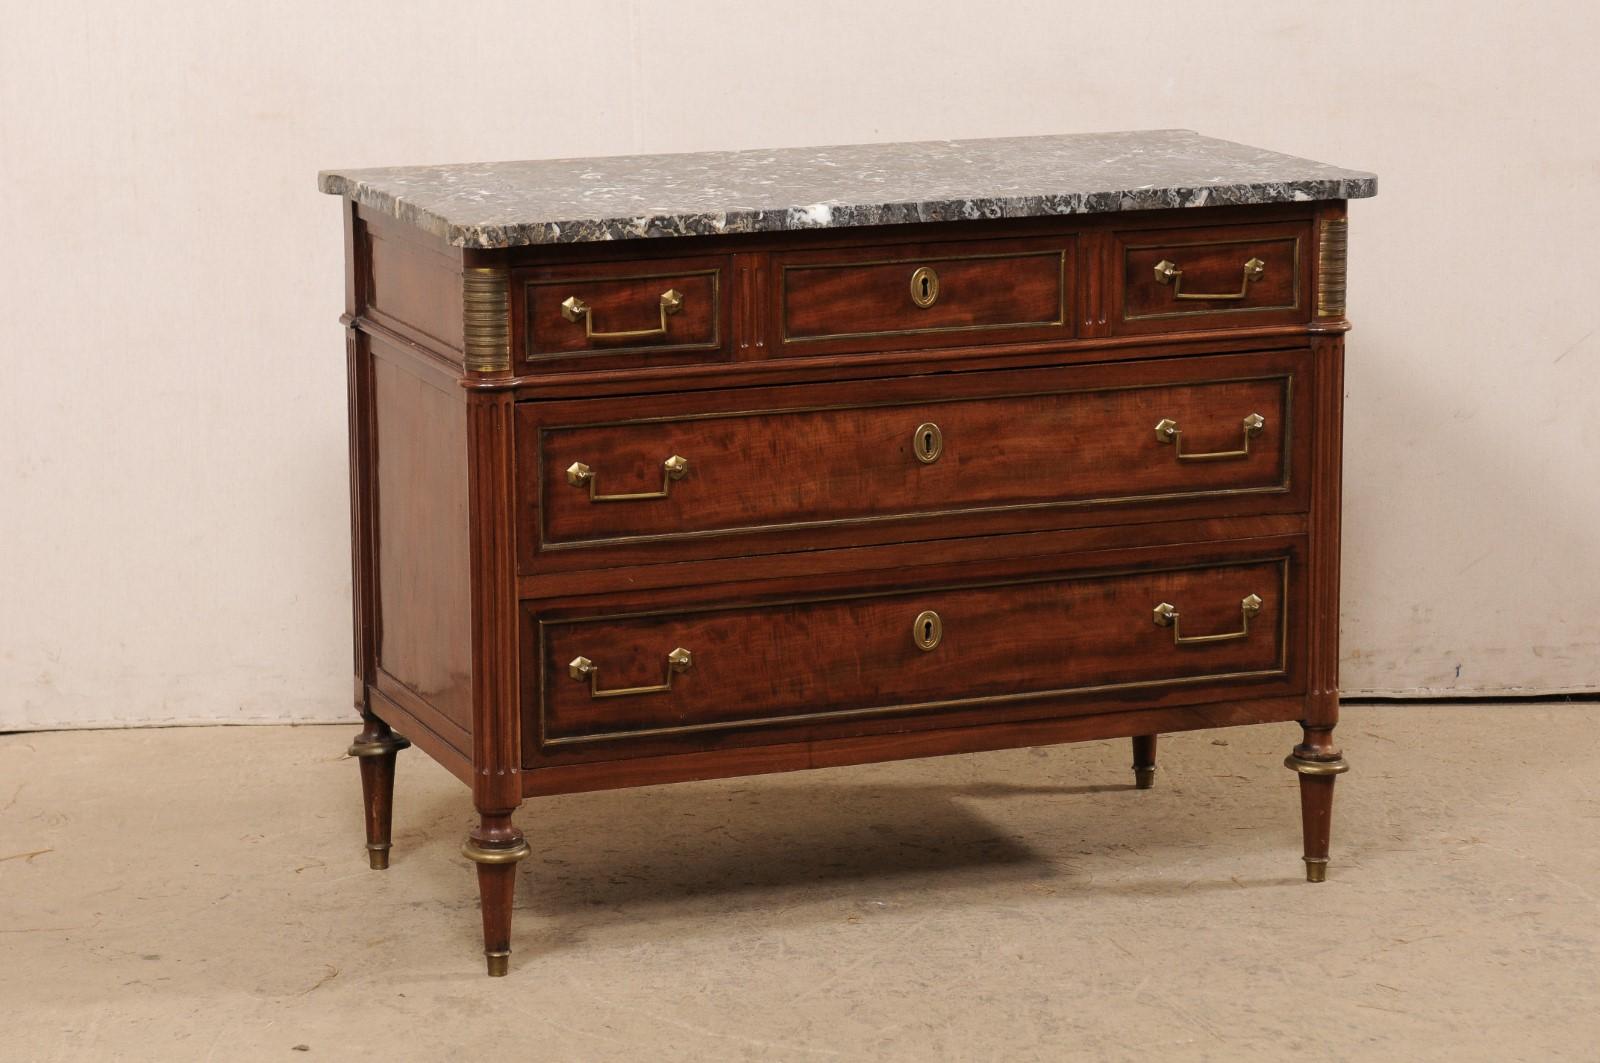 A French Neoclassical period chest with its original marble top from the early 19th century. This antique commode from France features a rectangular-shaped marble top, with pronounced rounded corners, which rests atop a neoclassically carved case